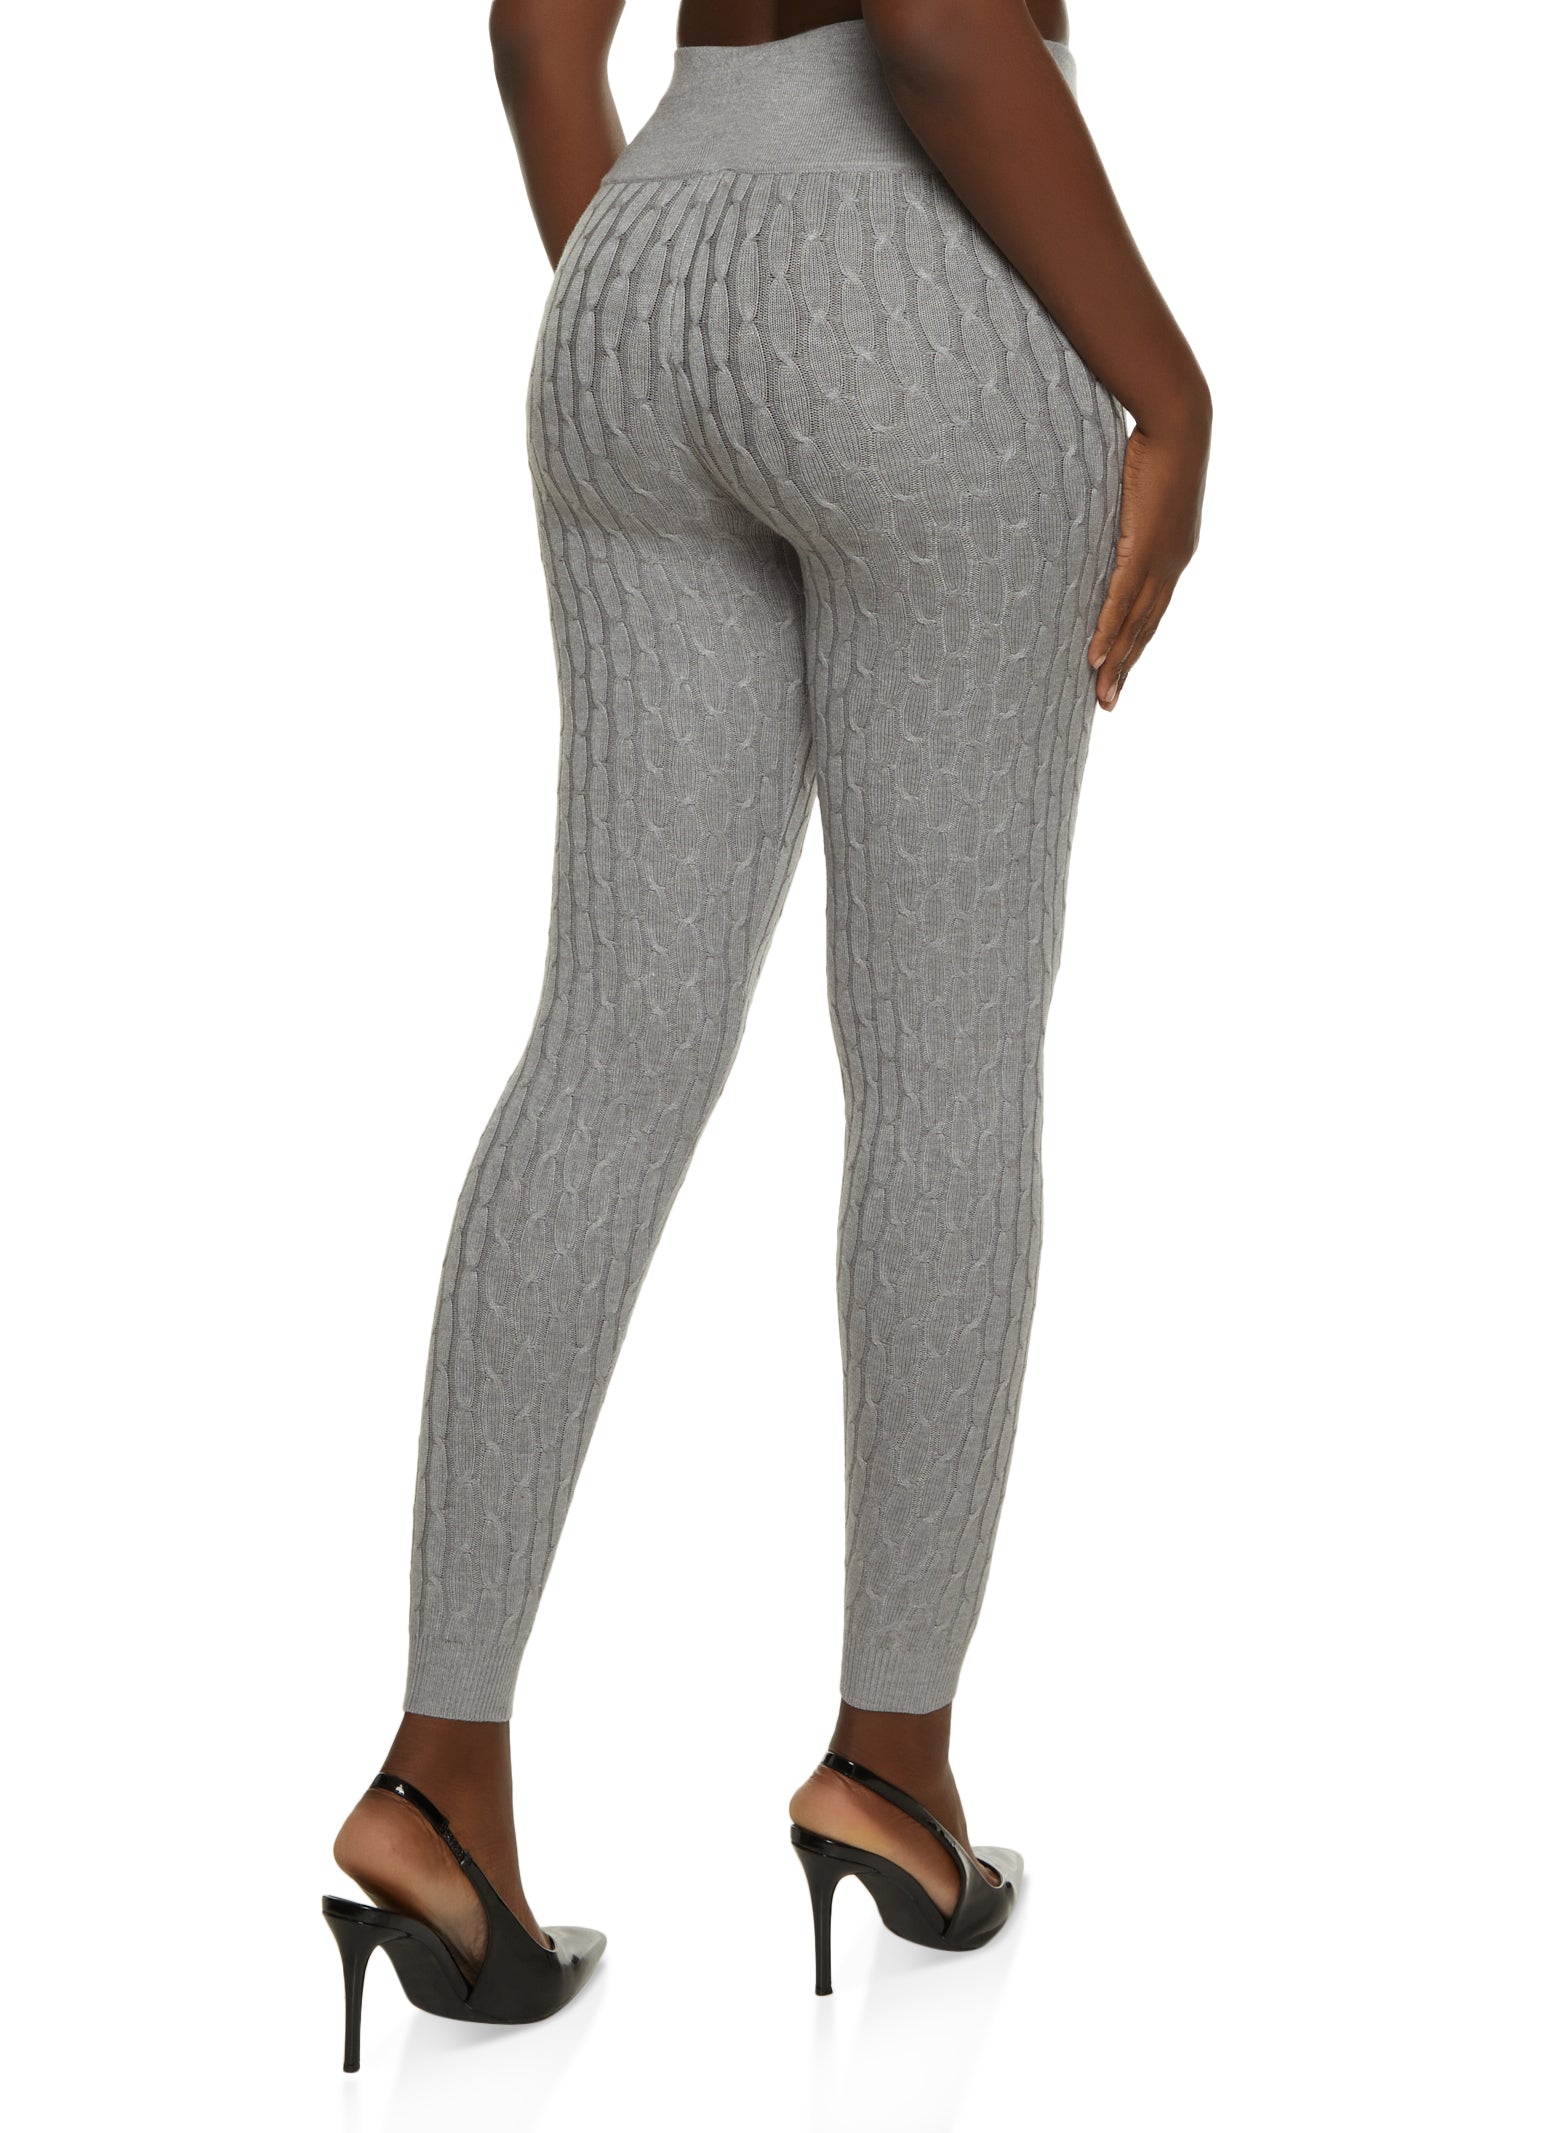 Cable Knit Crew Neck Sweater and Leggings Set